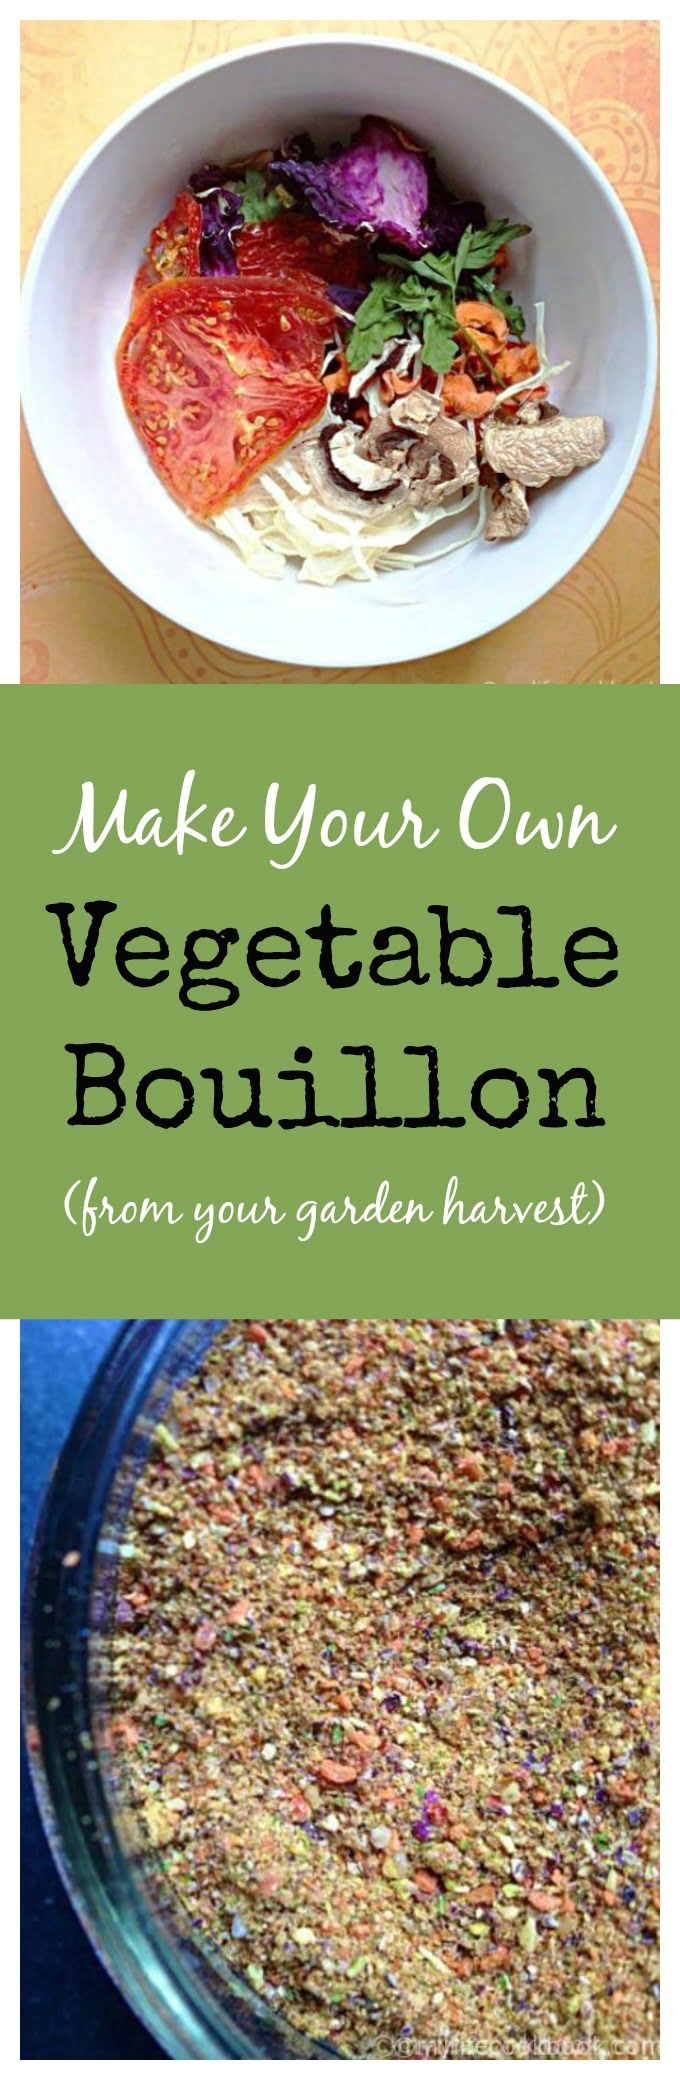 This is an easy way to make vegetable bouillon from fresh vegetables you get from your garden or farmers market.